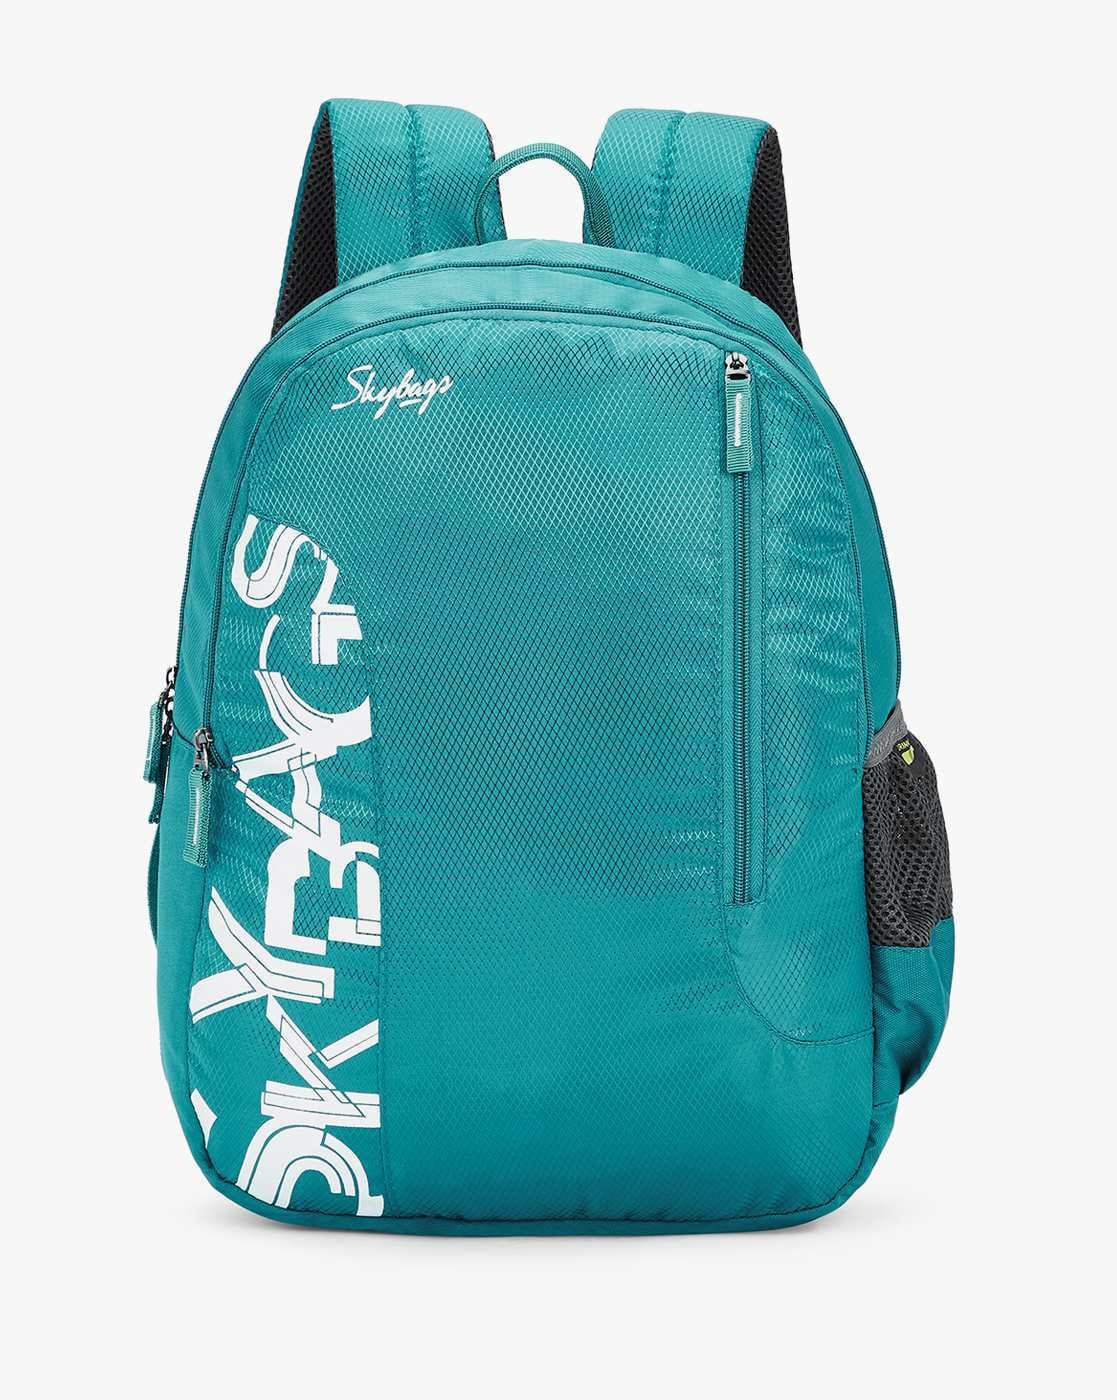 Buy Skybags Xeno 01 Laptop Backpack (E) Black online